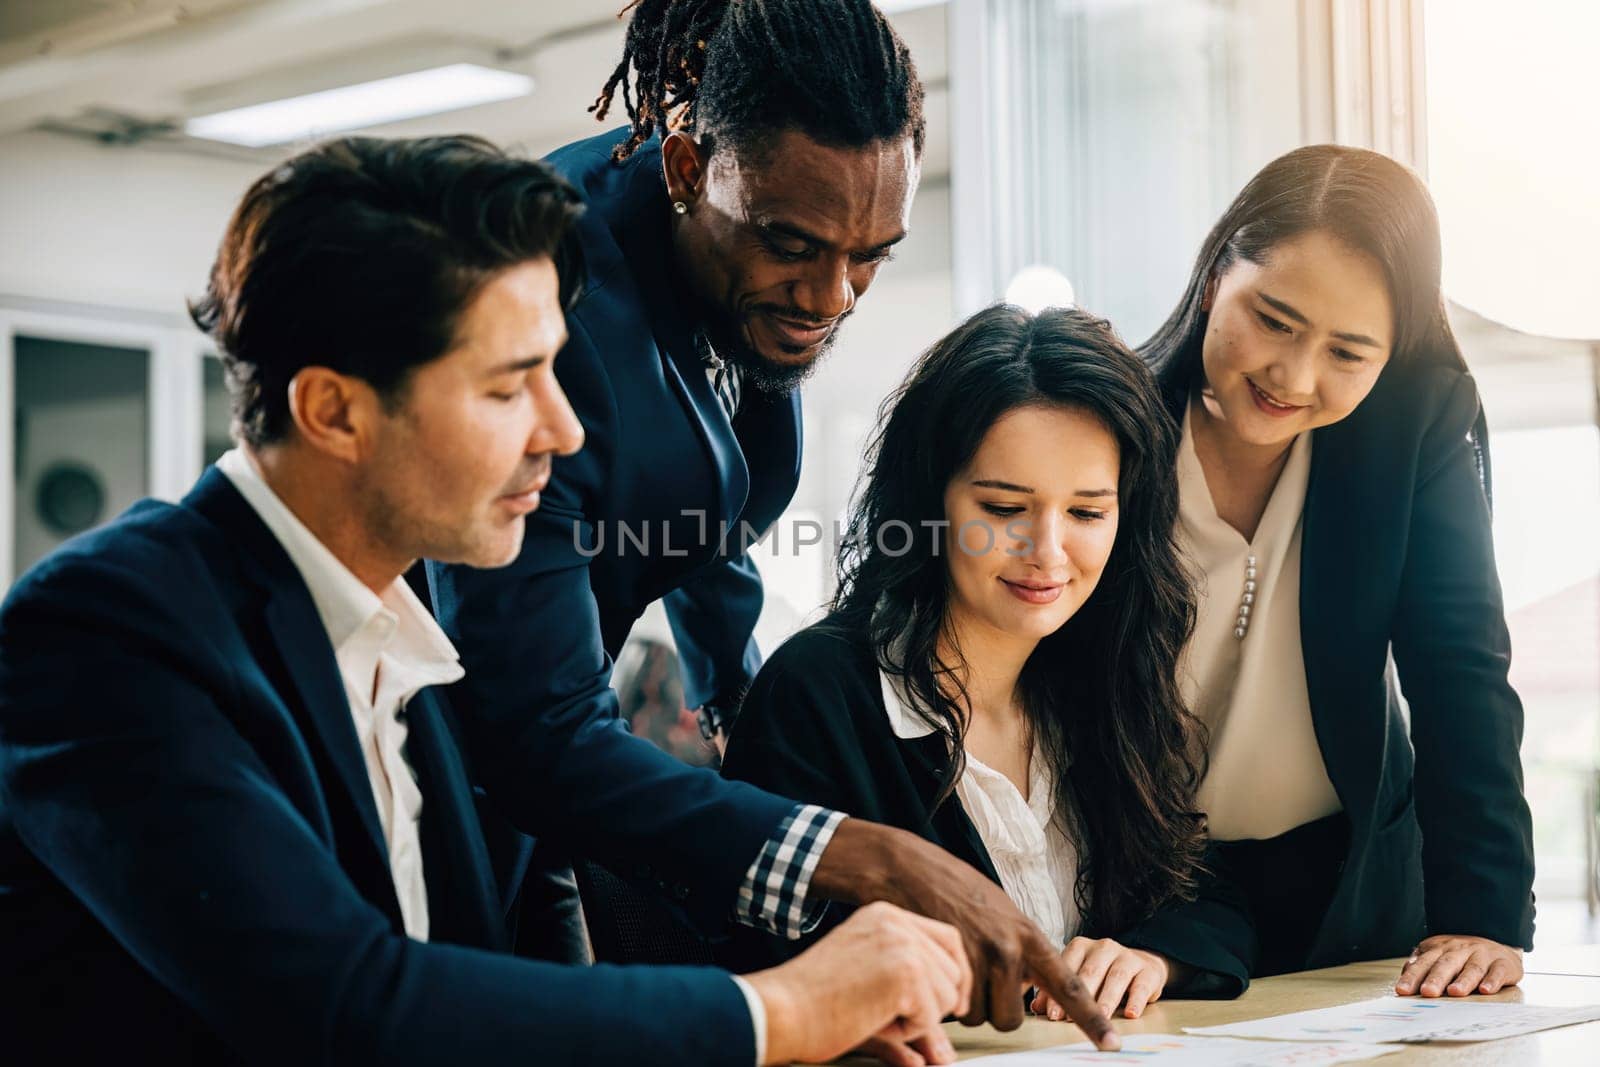 In a meeting room, a global team engages in lively discussion, led by a female leader. Together, they plan and collaborate on strategies, analyze charts, and work with documents for success. by Sorapop